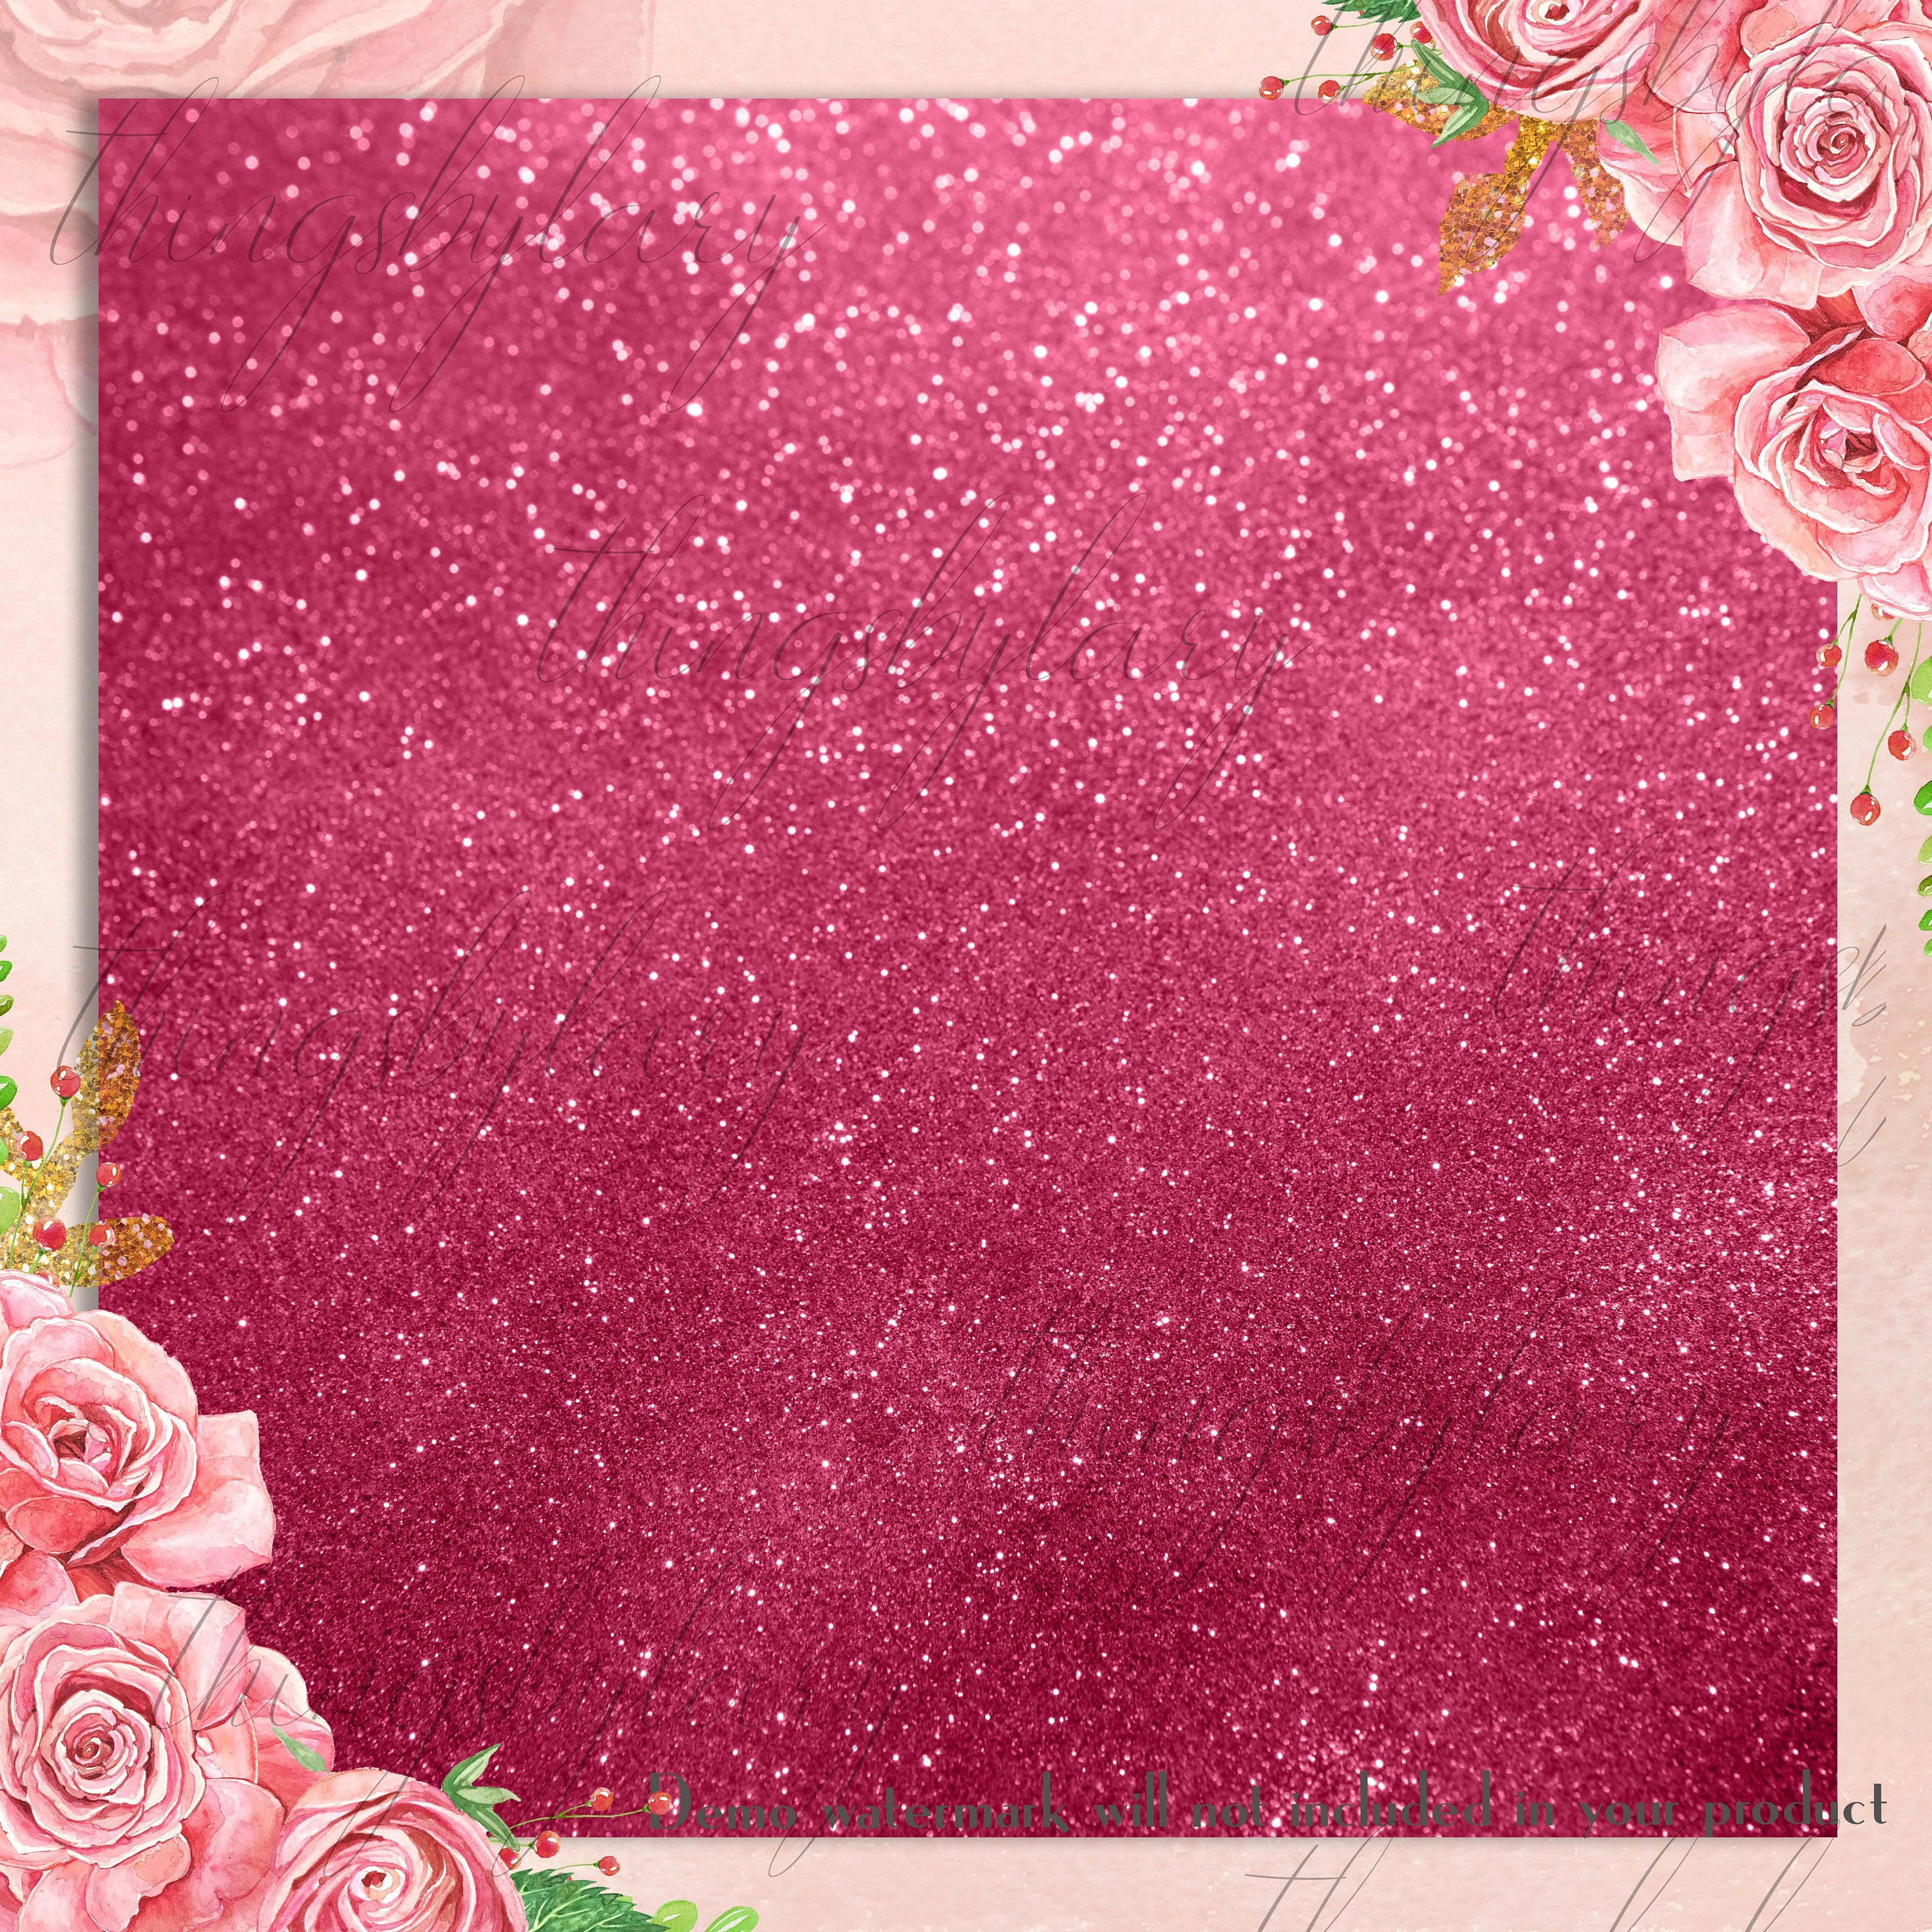 42 Blush Pink Glitter Sequin Digital Papers 12x12&quot; 300 Dpi Planner Paper Commercial Use Instant Download Scrapbook Digital Glitter Tinsel